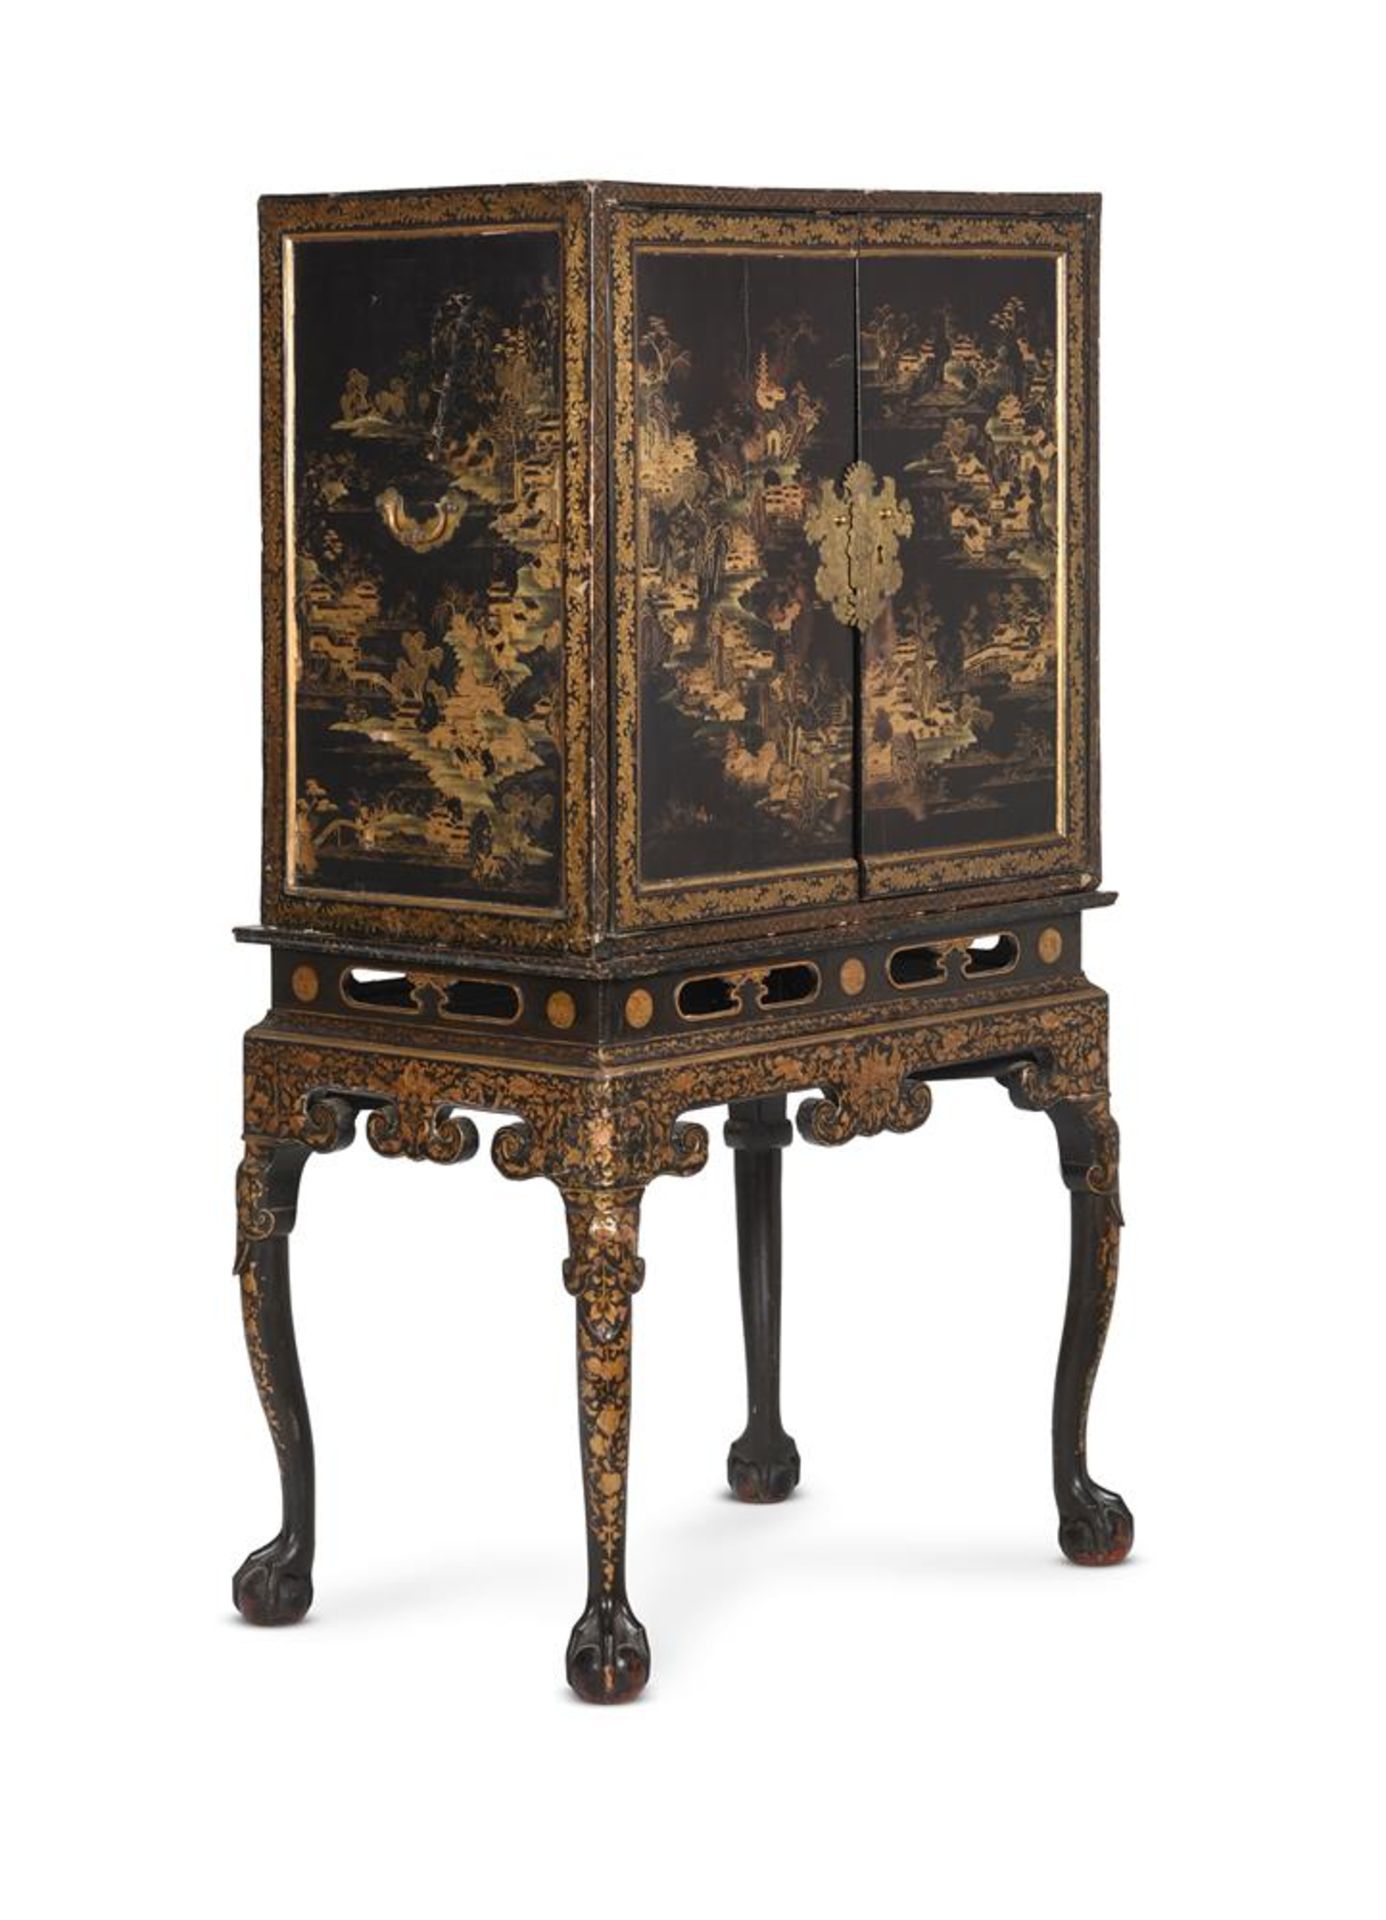 A CHINESE EXPORT LACQUER CABINET ON STAND, LATE 18TH OR EARLY 19TH CENTURY - Bild 9 aus 15